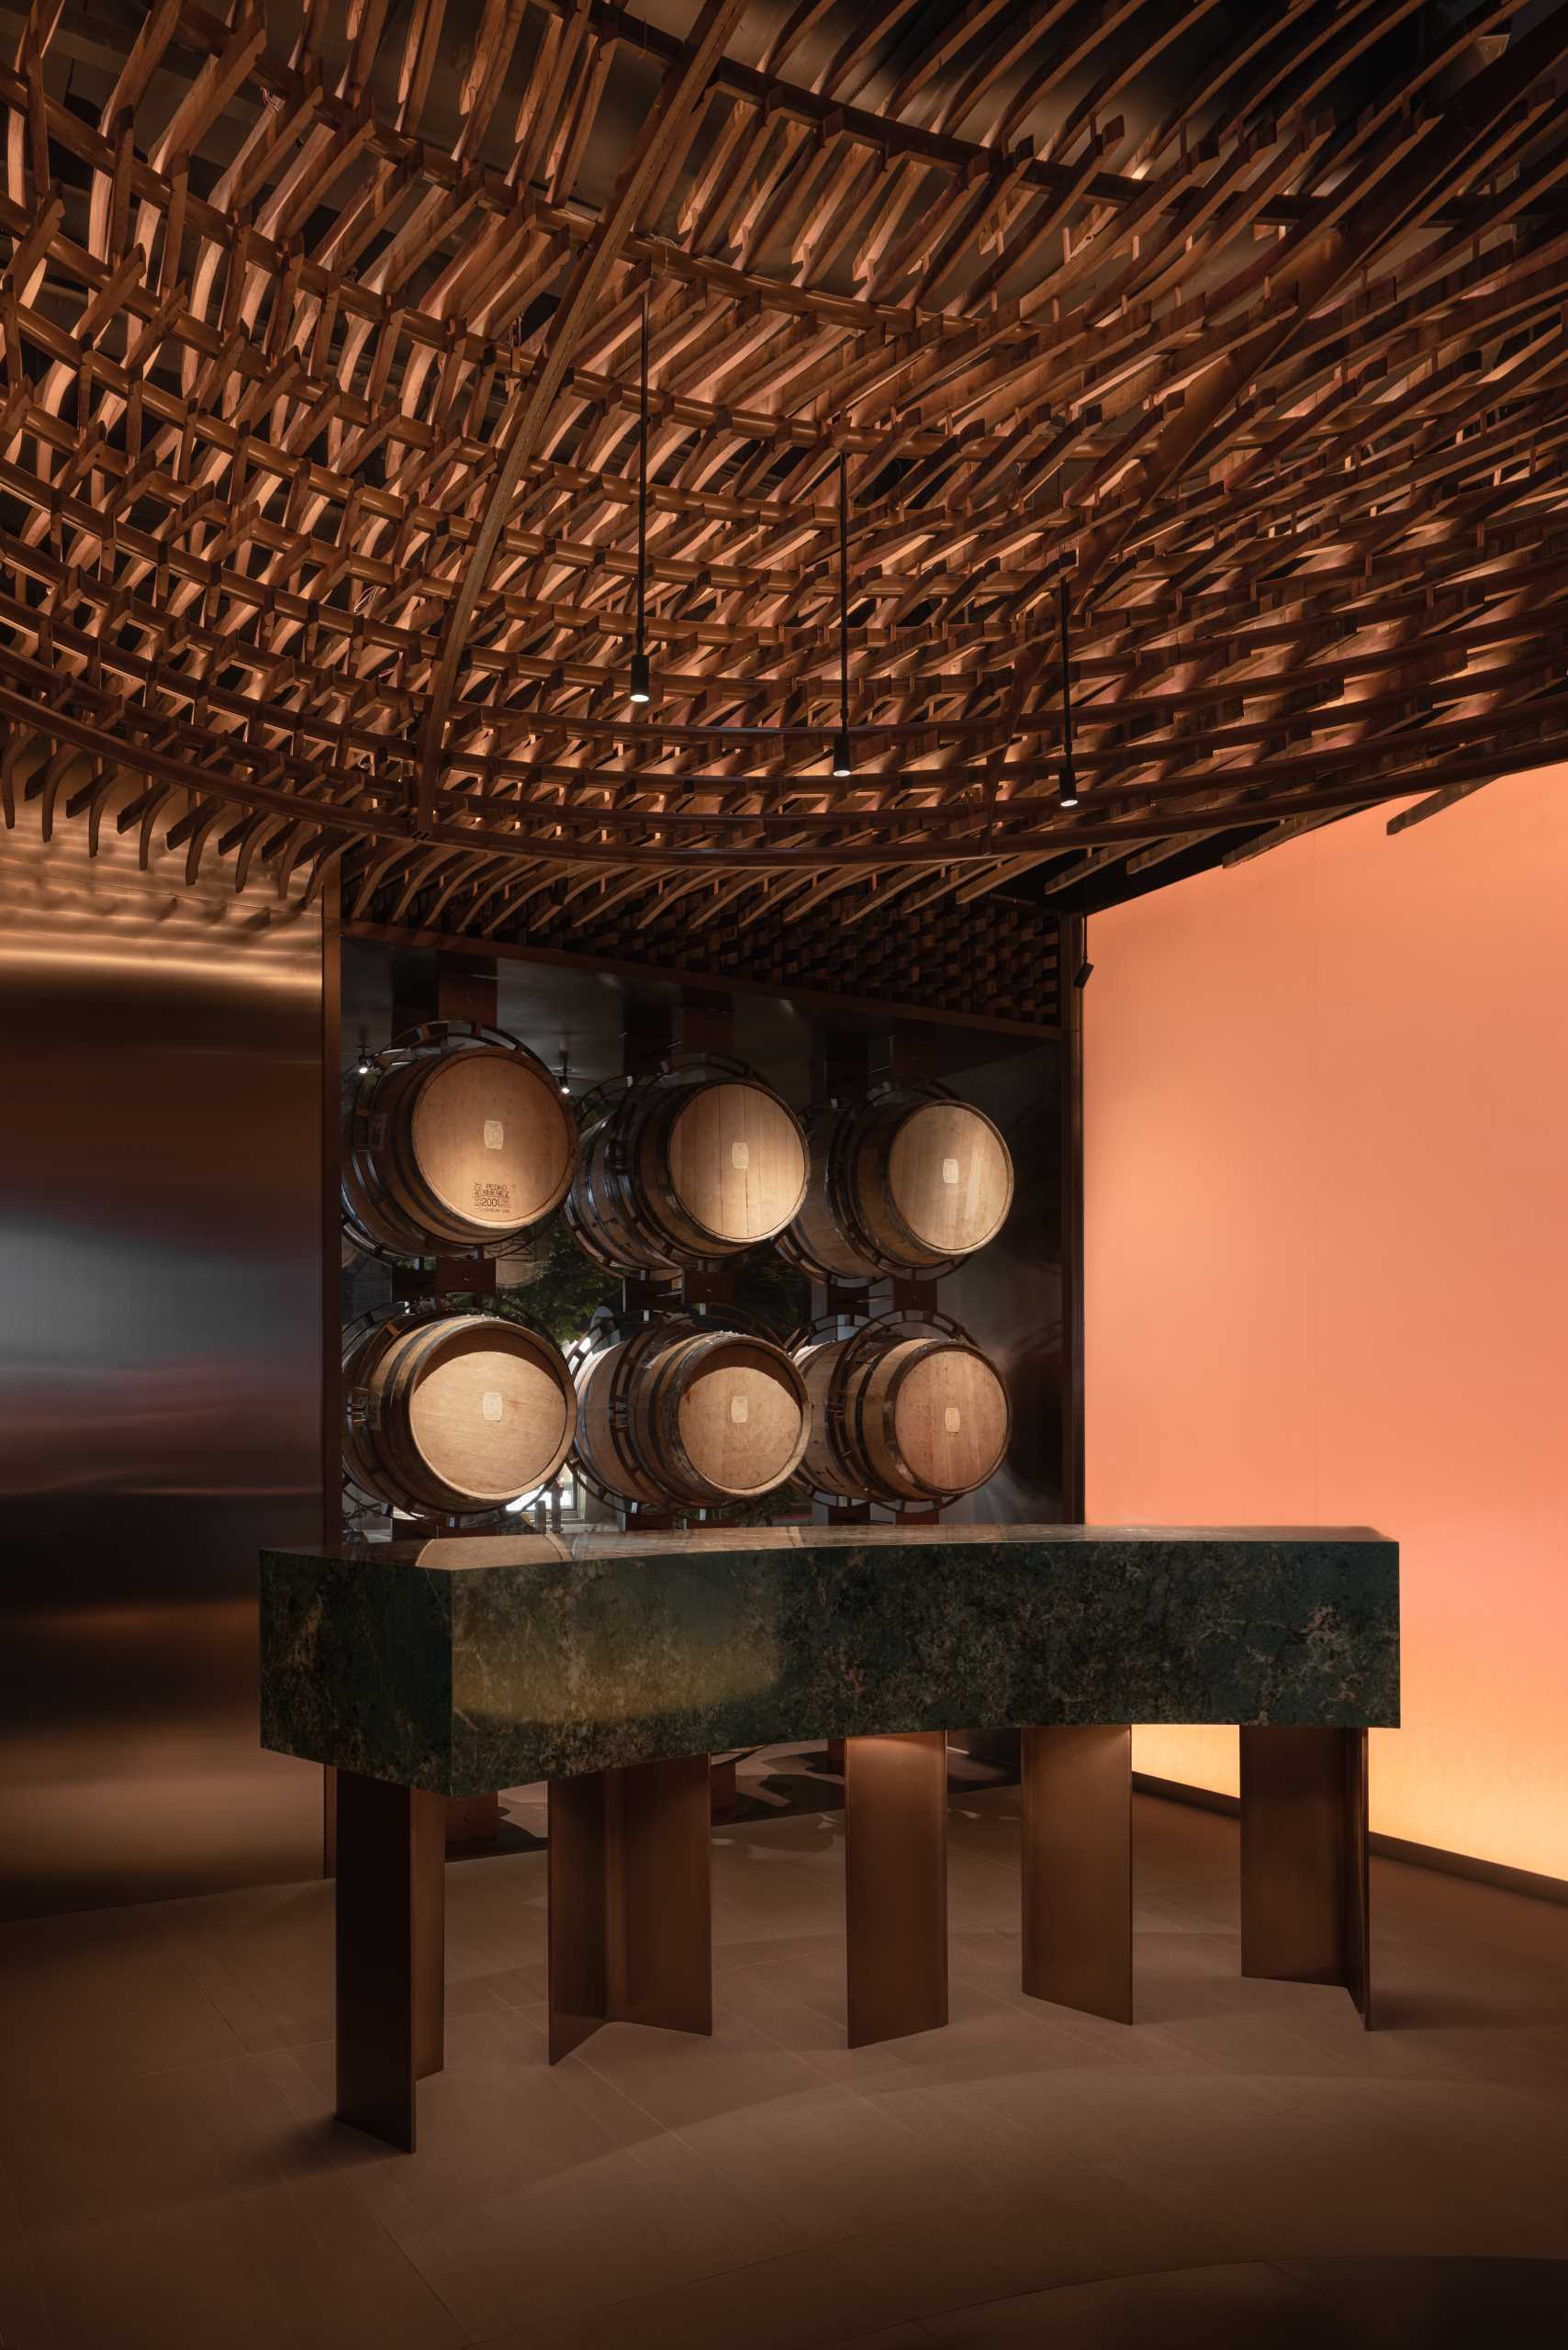 6000 pieces of discarded wooden whiskey barrels were recycled to make this modern bar.